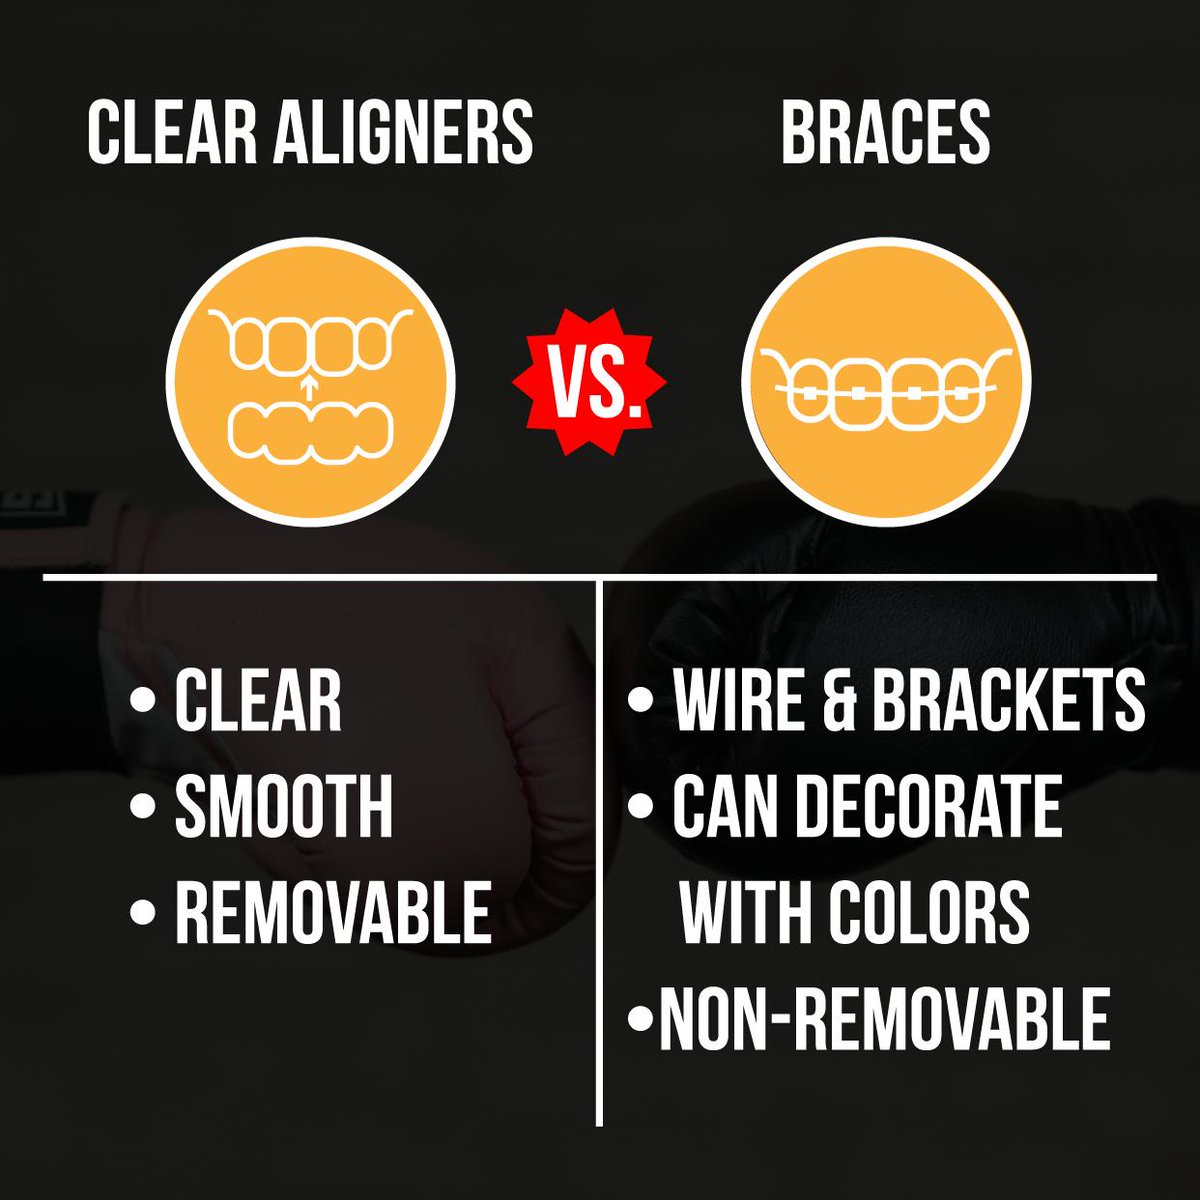 HERE ARE A few simple differences between Invisalign and braces! It really is just a matter of what you prefer! #invisalign #braces #StraightTeeth #EsiSmiles